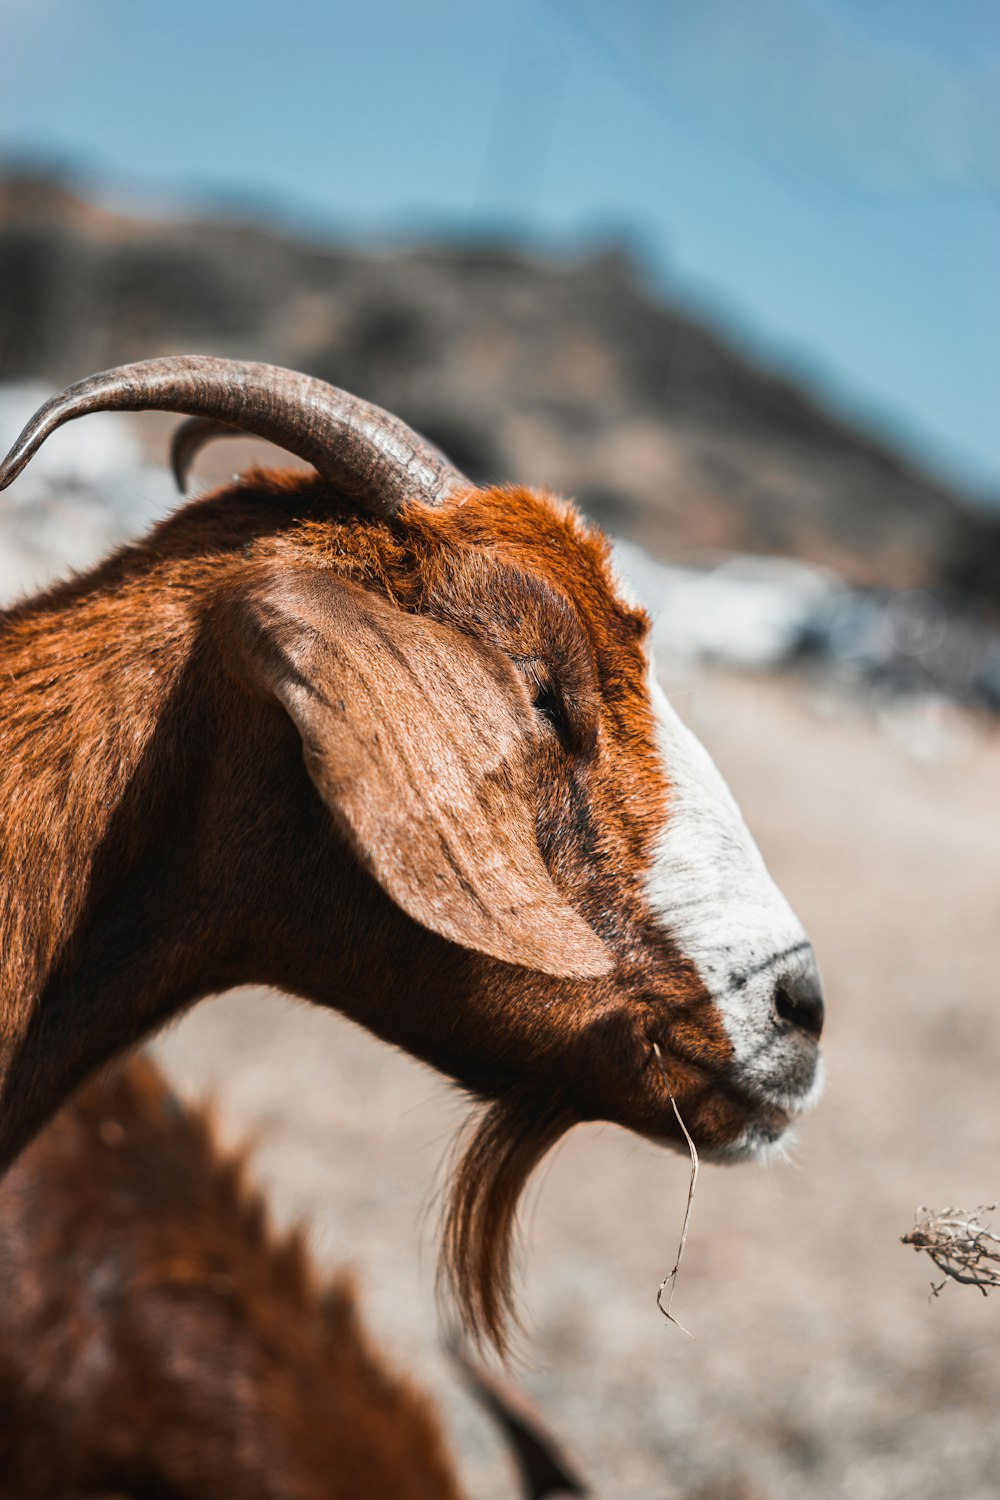 a close up of a goat with long horns